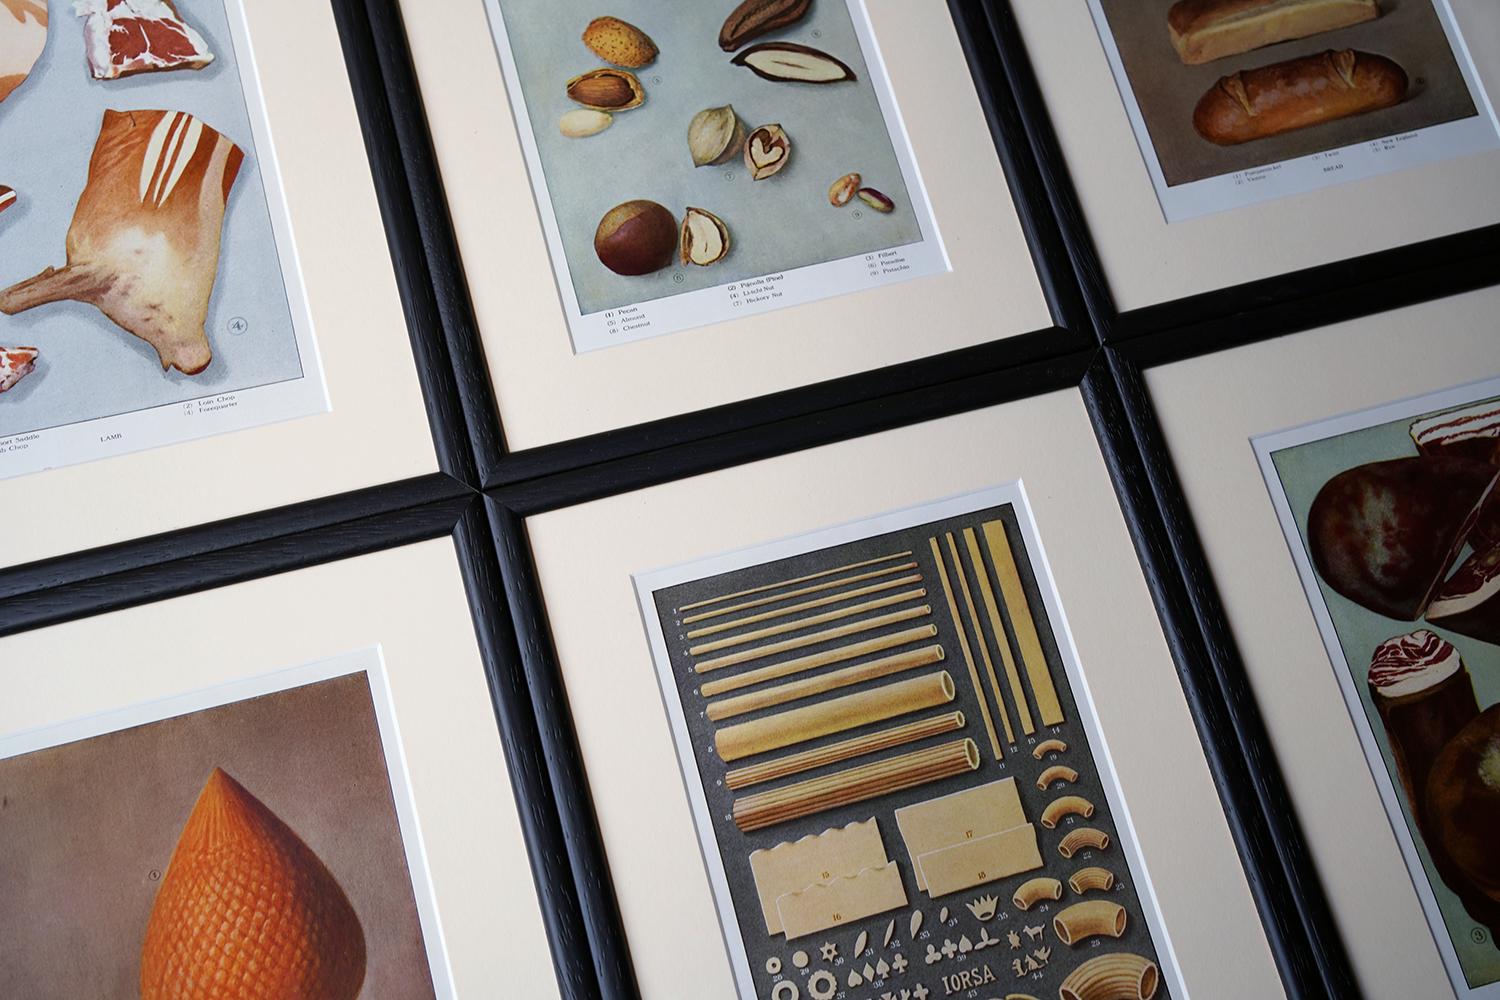 The group of six framed and glazed offset lithograph prints, showing a mixture of foodstuffs in profile, of pasta, meats, nuts, breads and cheeses, taken from 